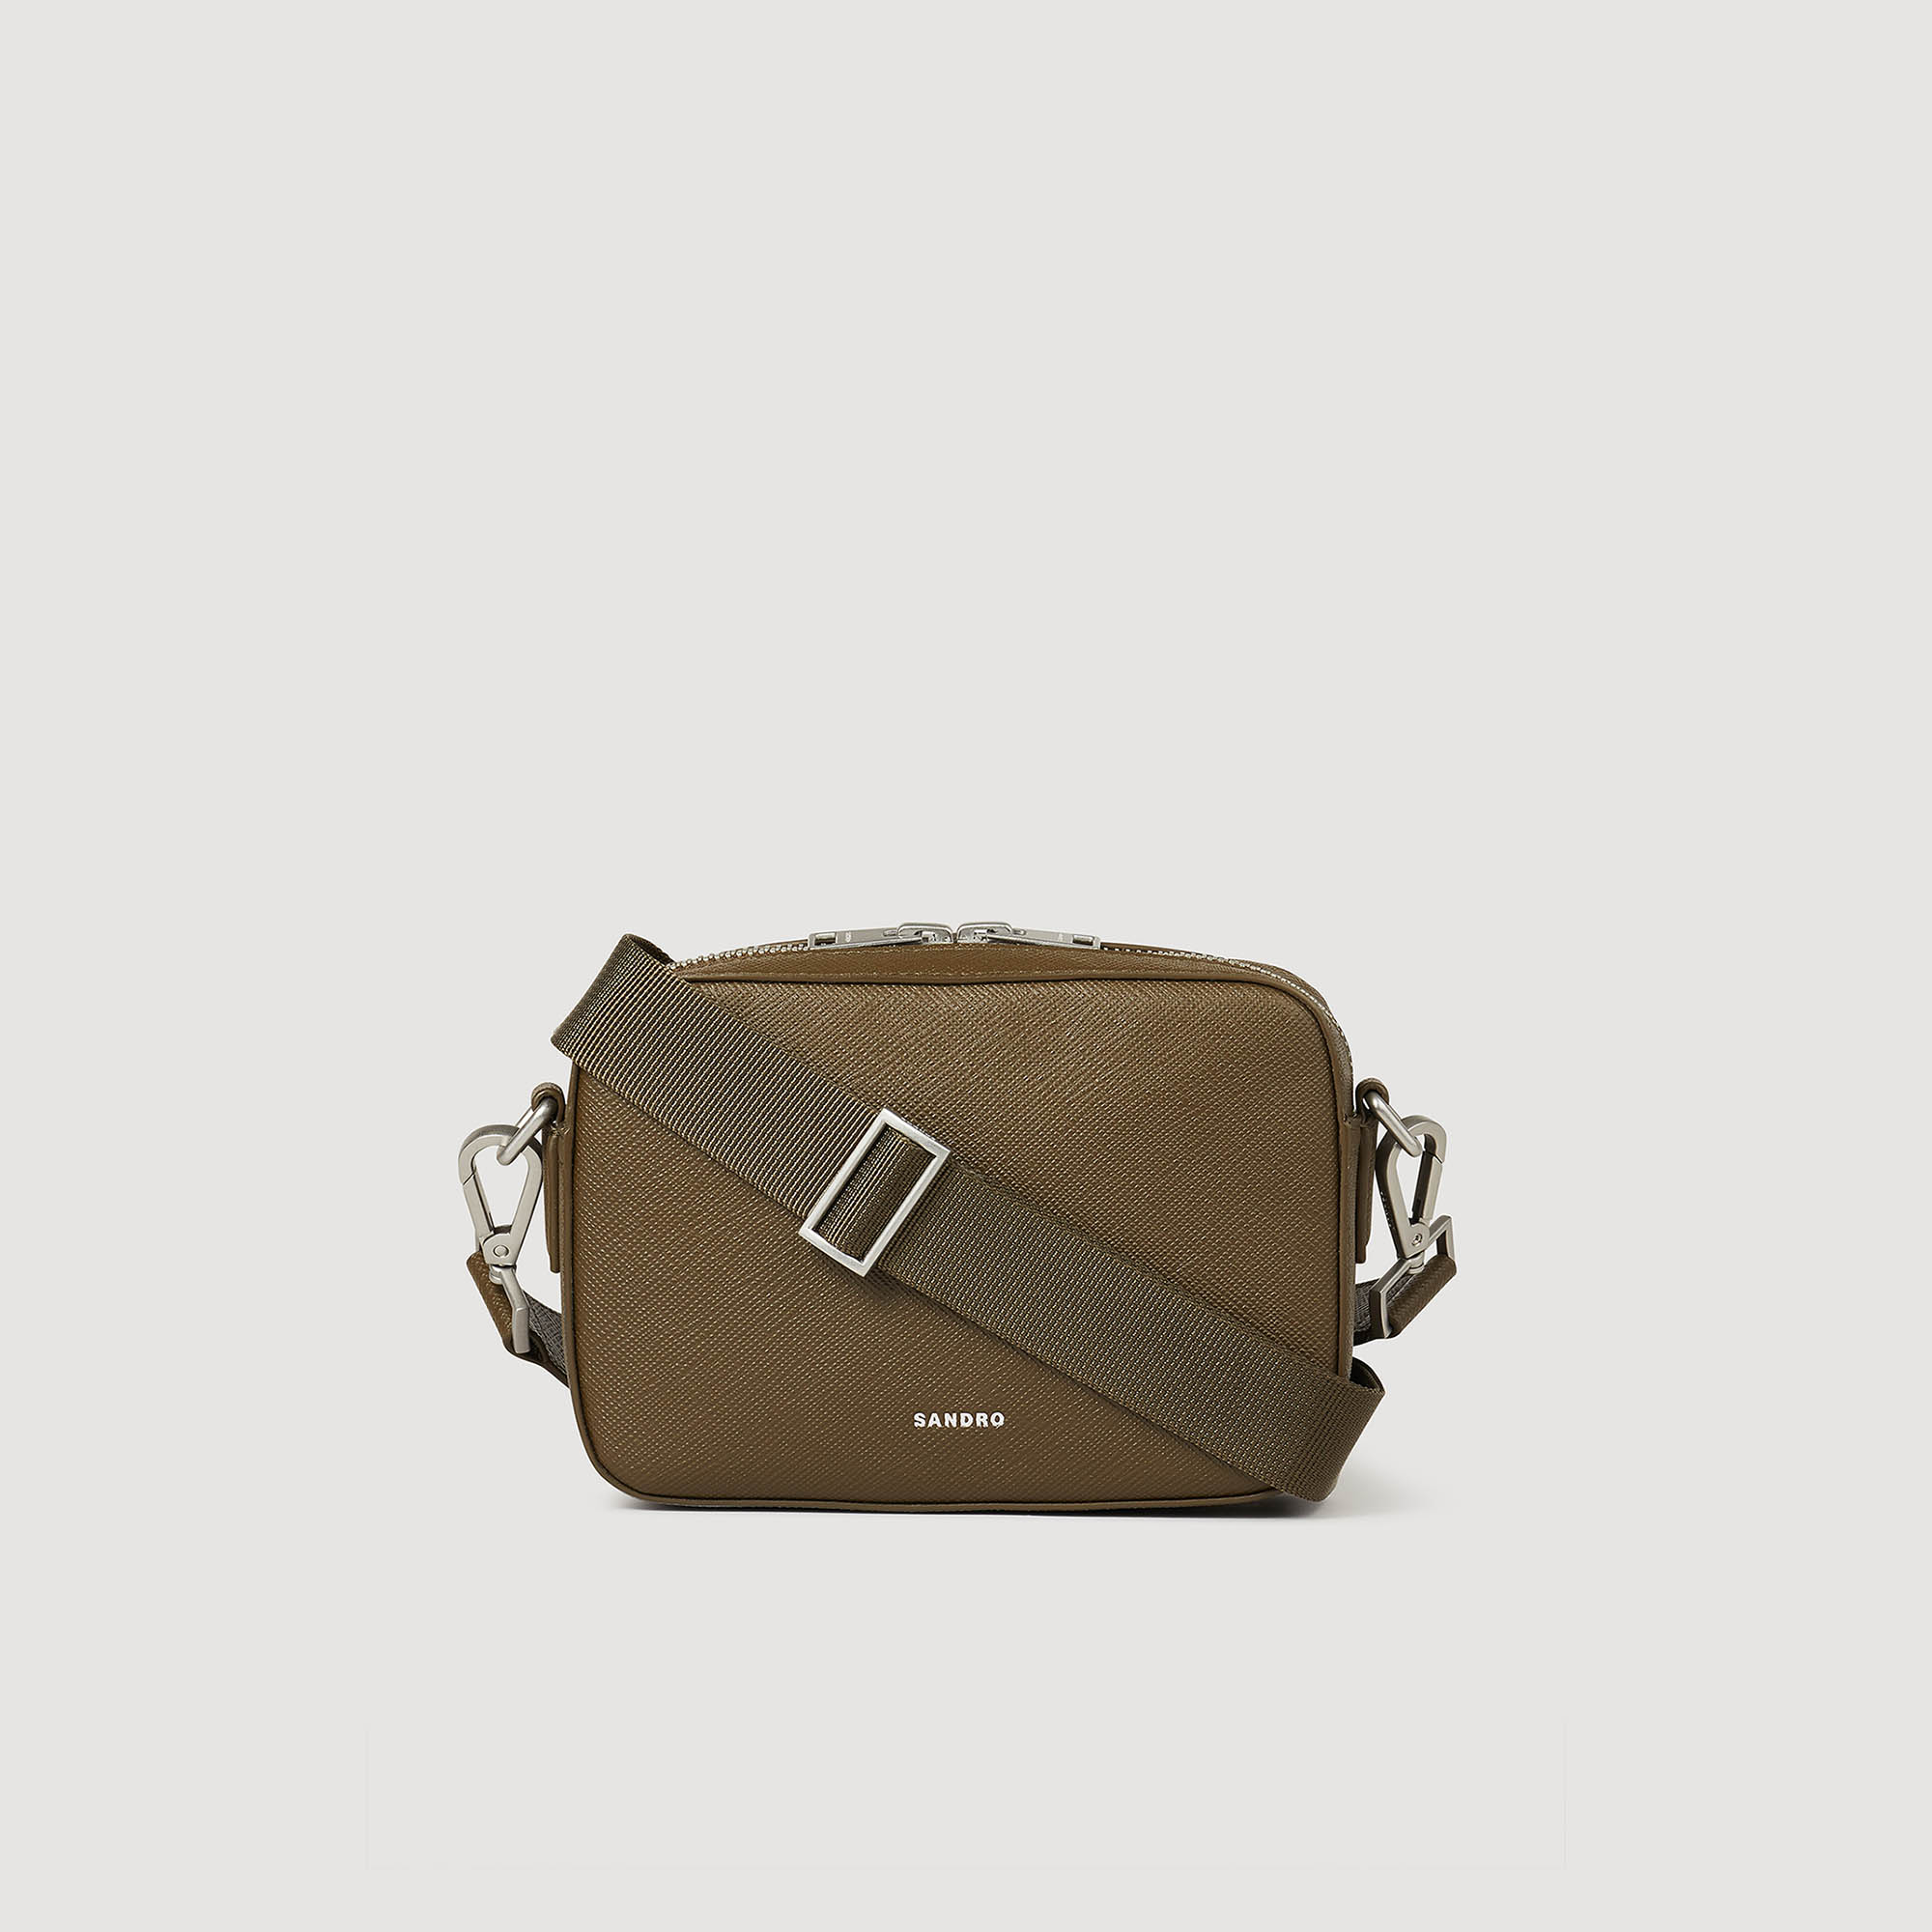 Sandro synderm Lining: Small bag in recycled saffiano leather, with a long adjustable shoulder strap in technical fabric, a lining in technical fabric, and embellished with a silver print embossed Sandro logo